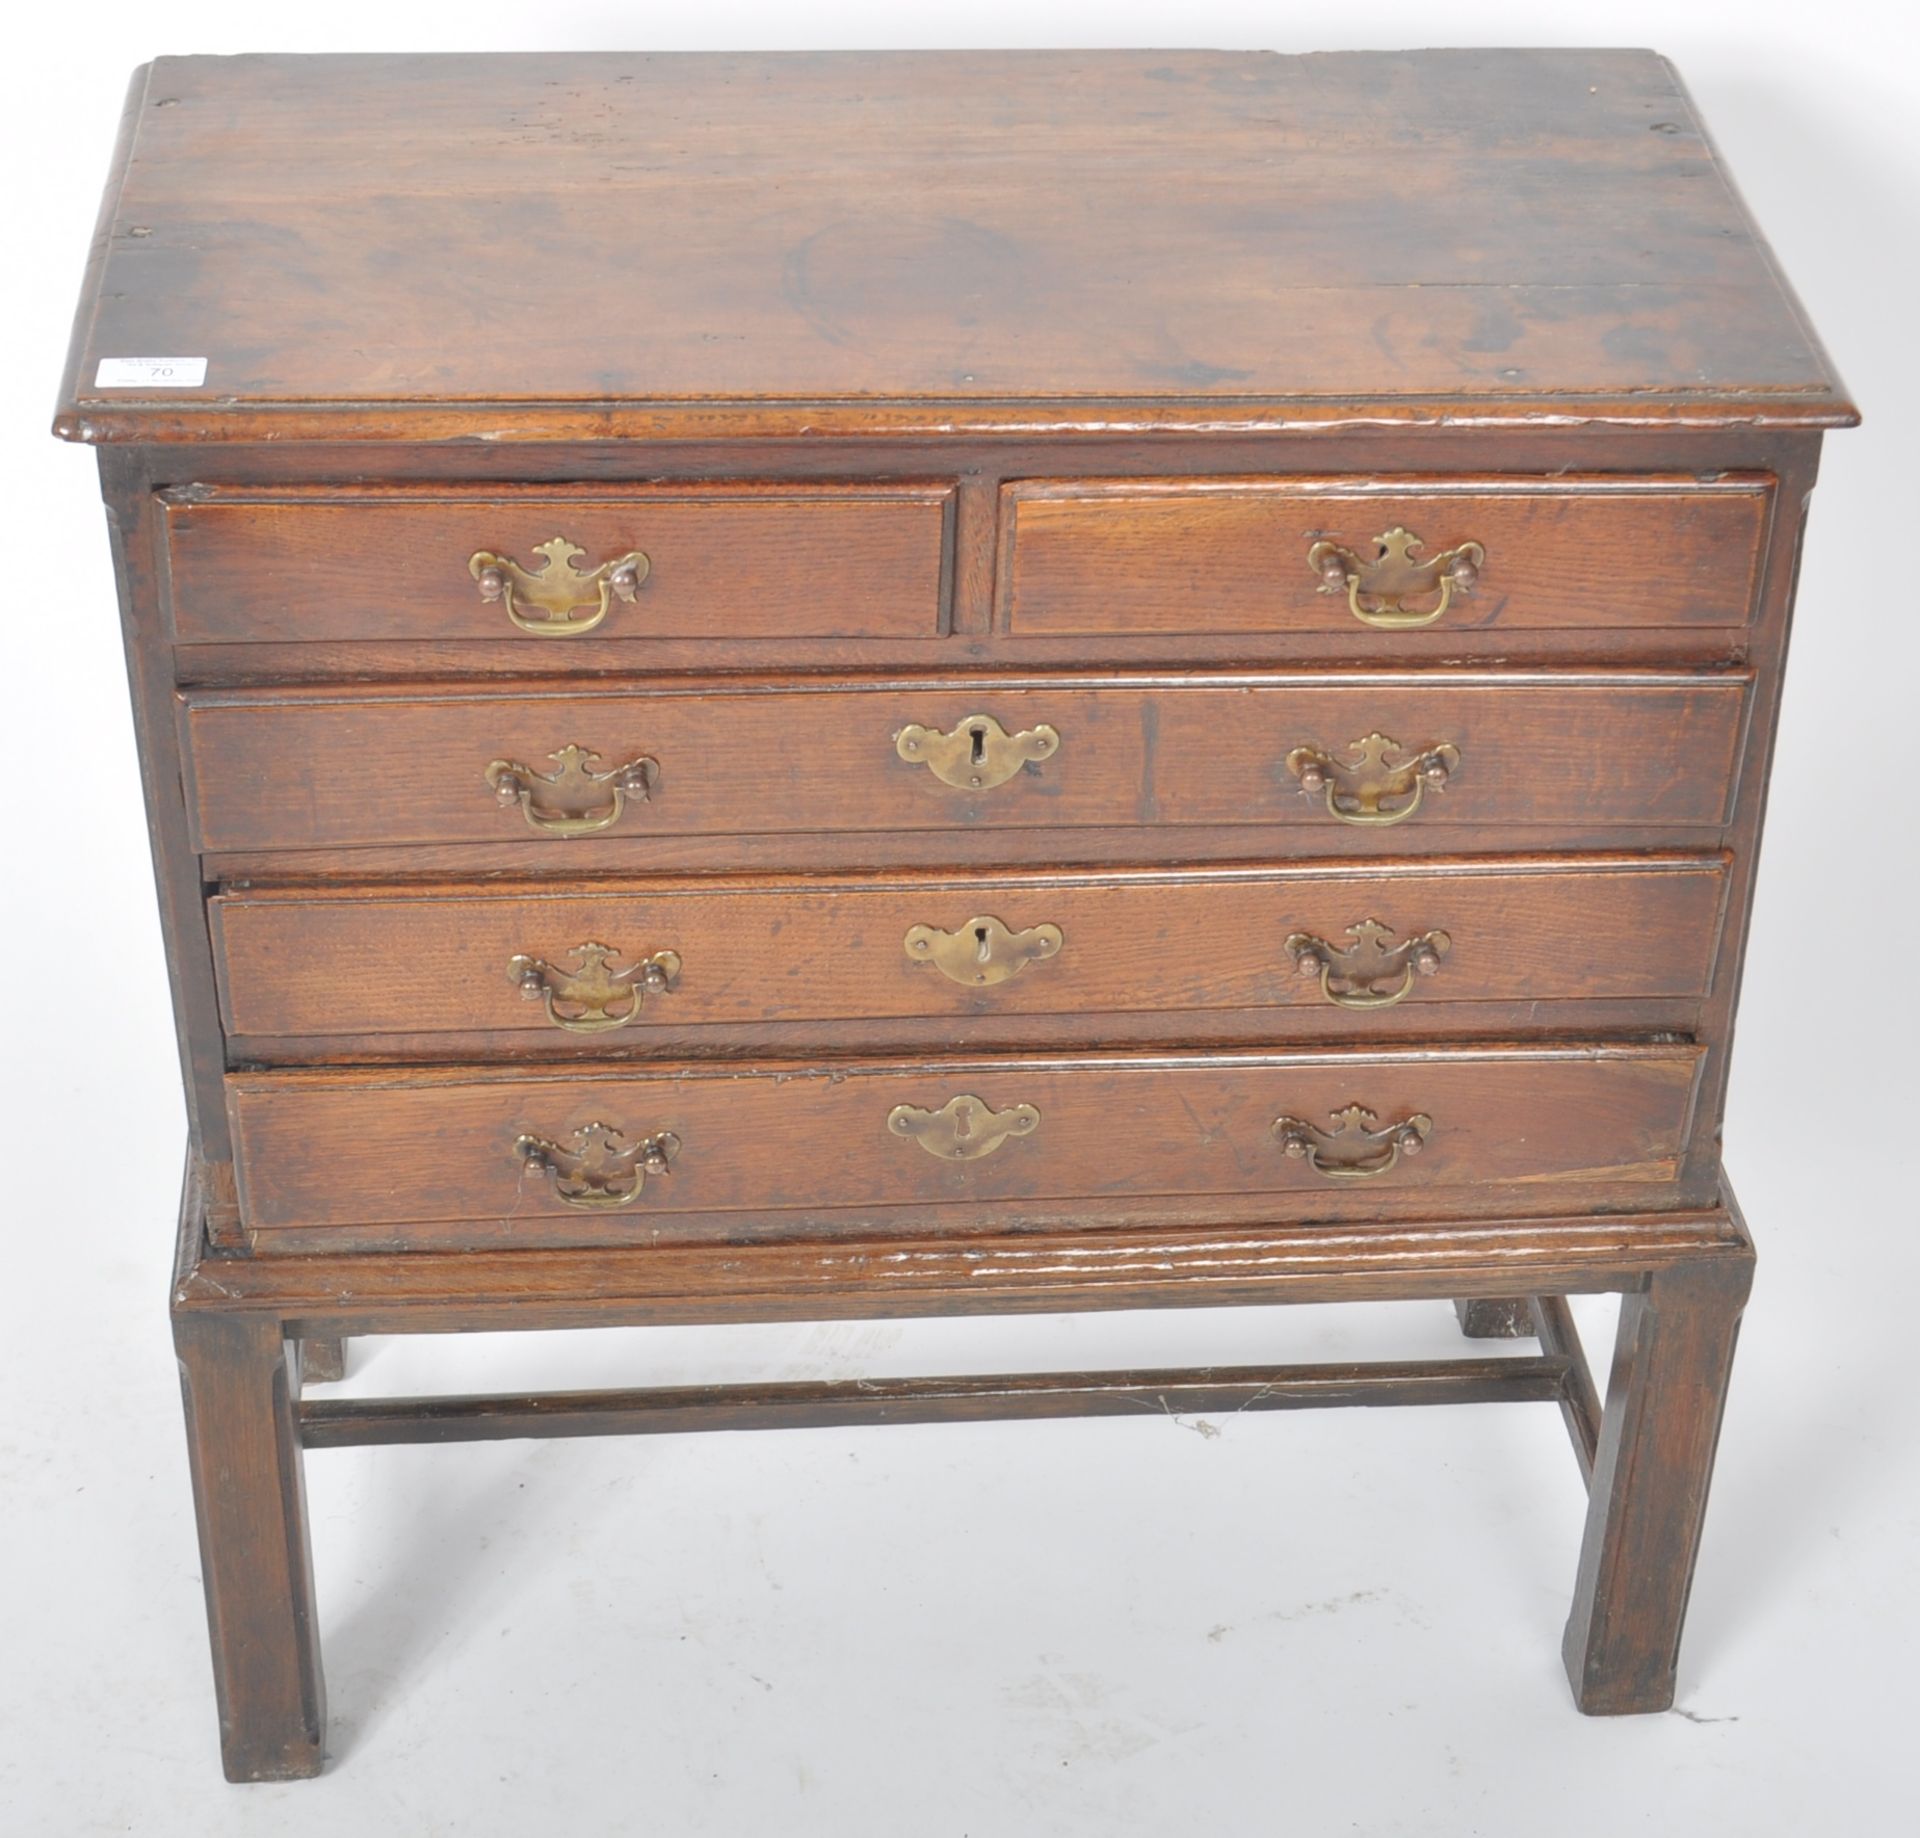 RARE 18TH CENTURY MINIATURE CHEST ON STAND - Image 2 of 9